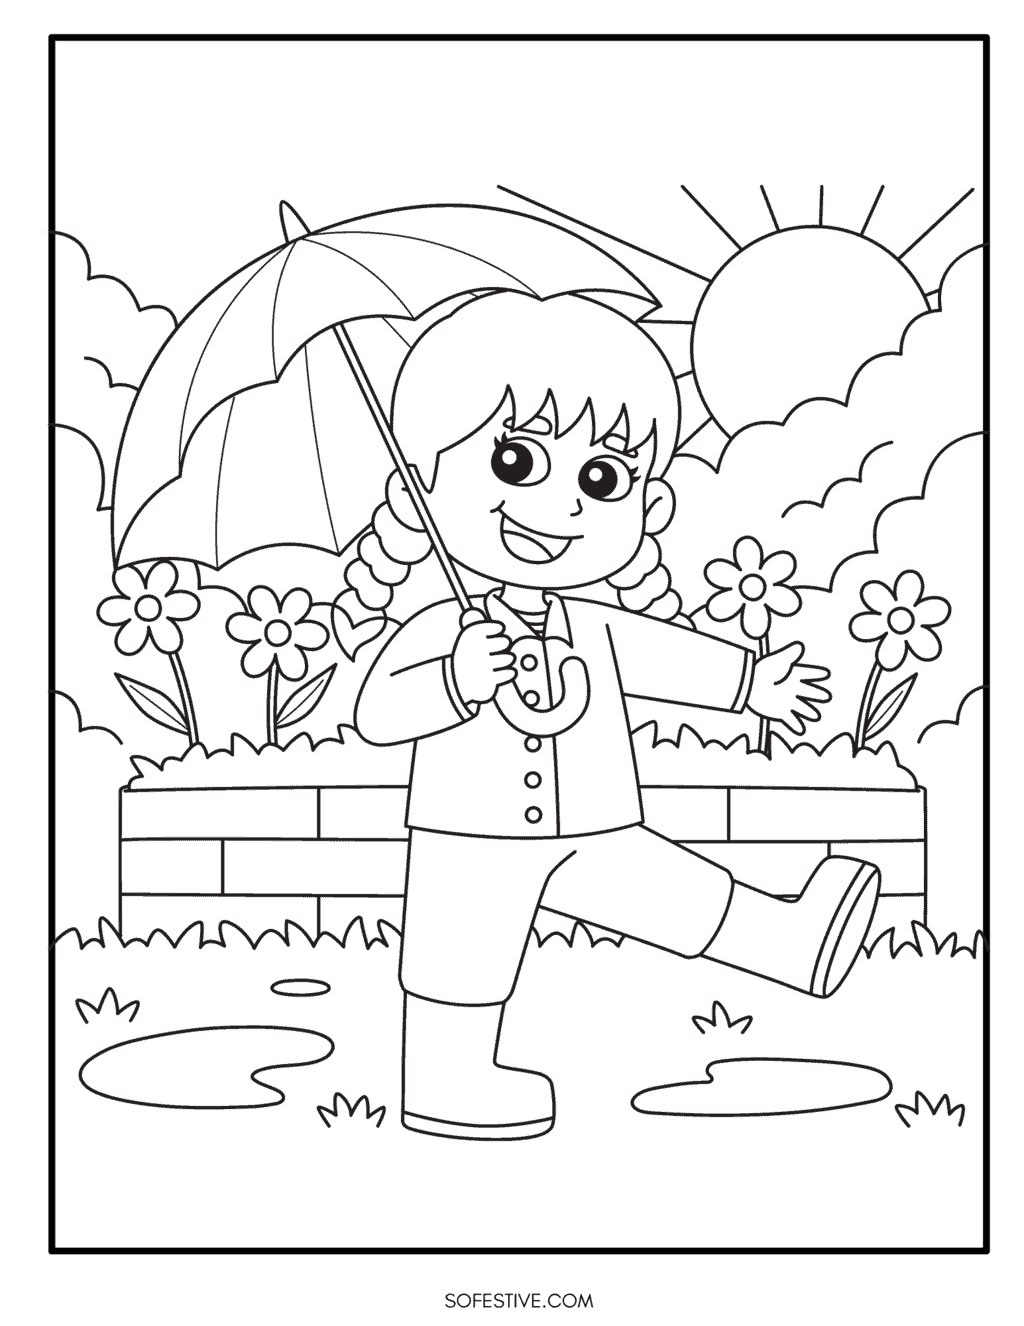 Free spring coloring pages updated